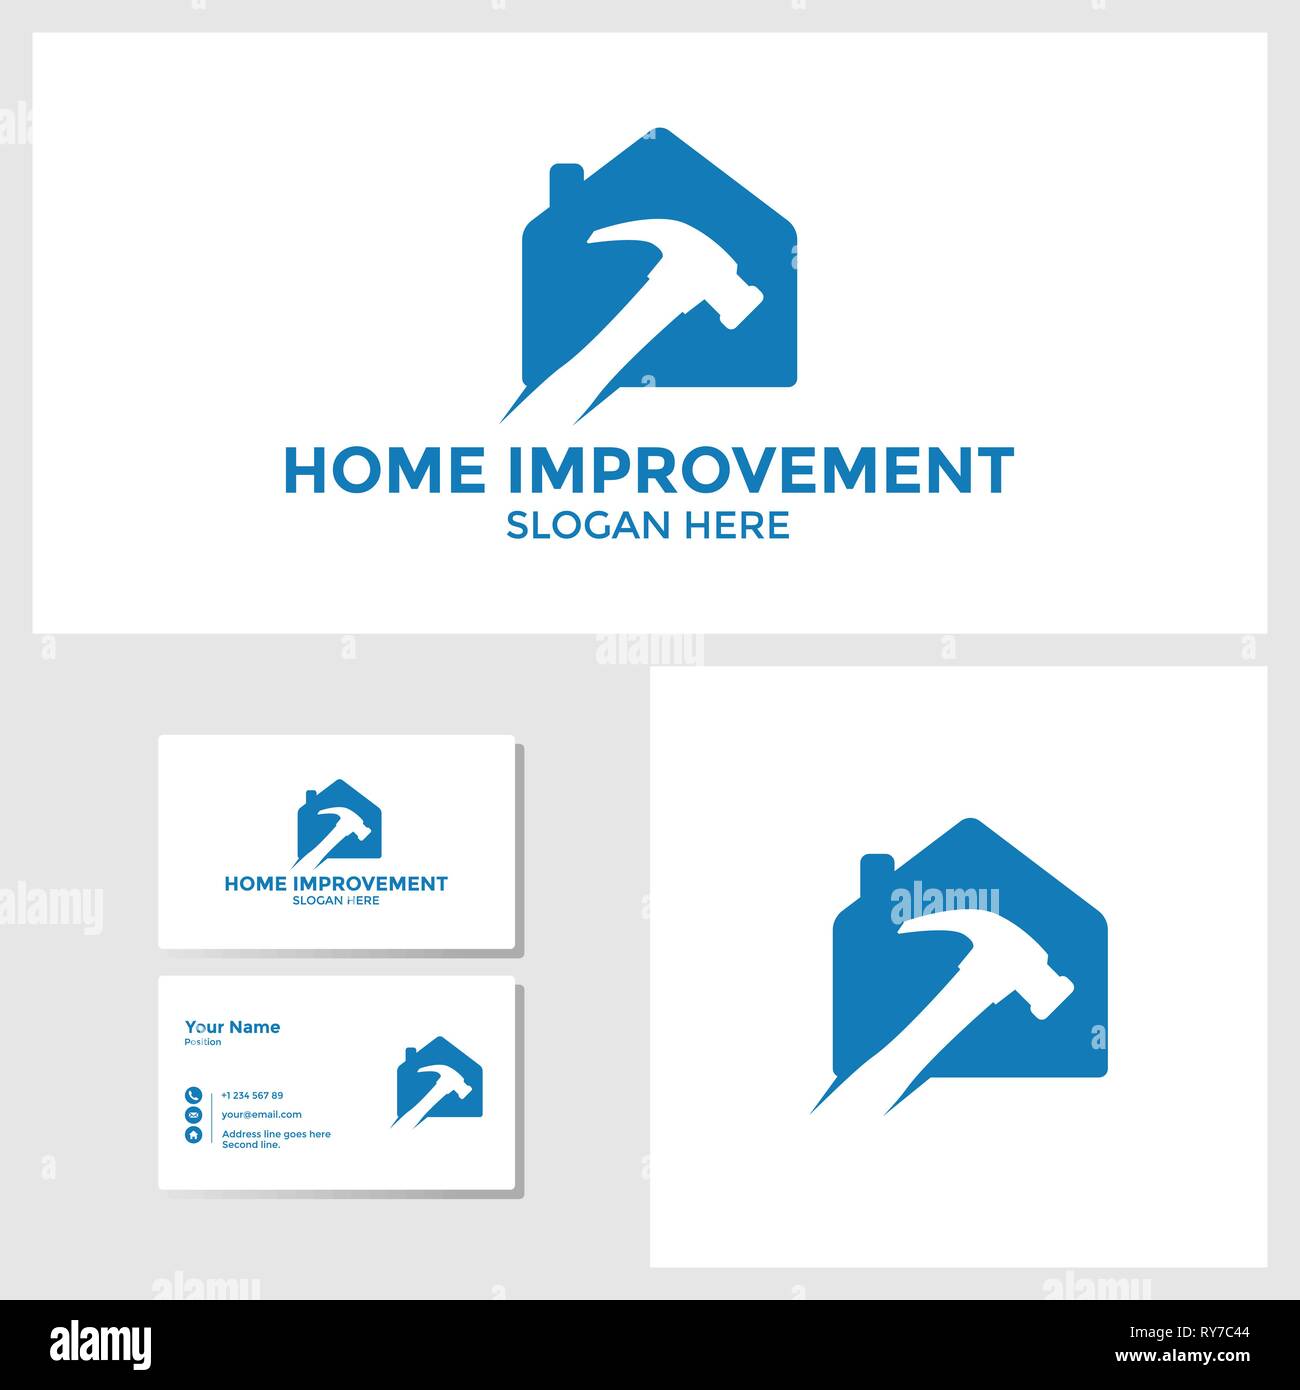 Home improvement logo design inspiration with business card mockup Stock Vector